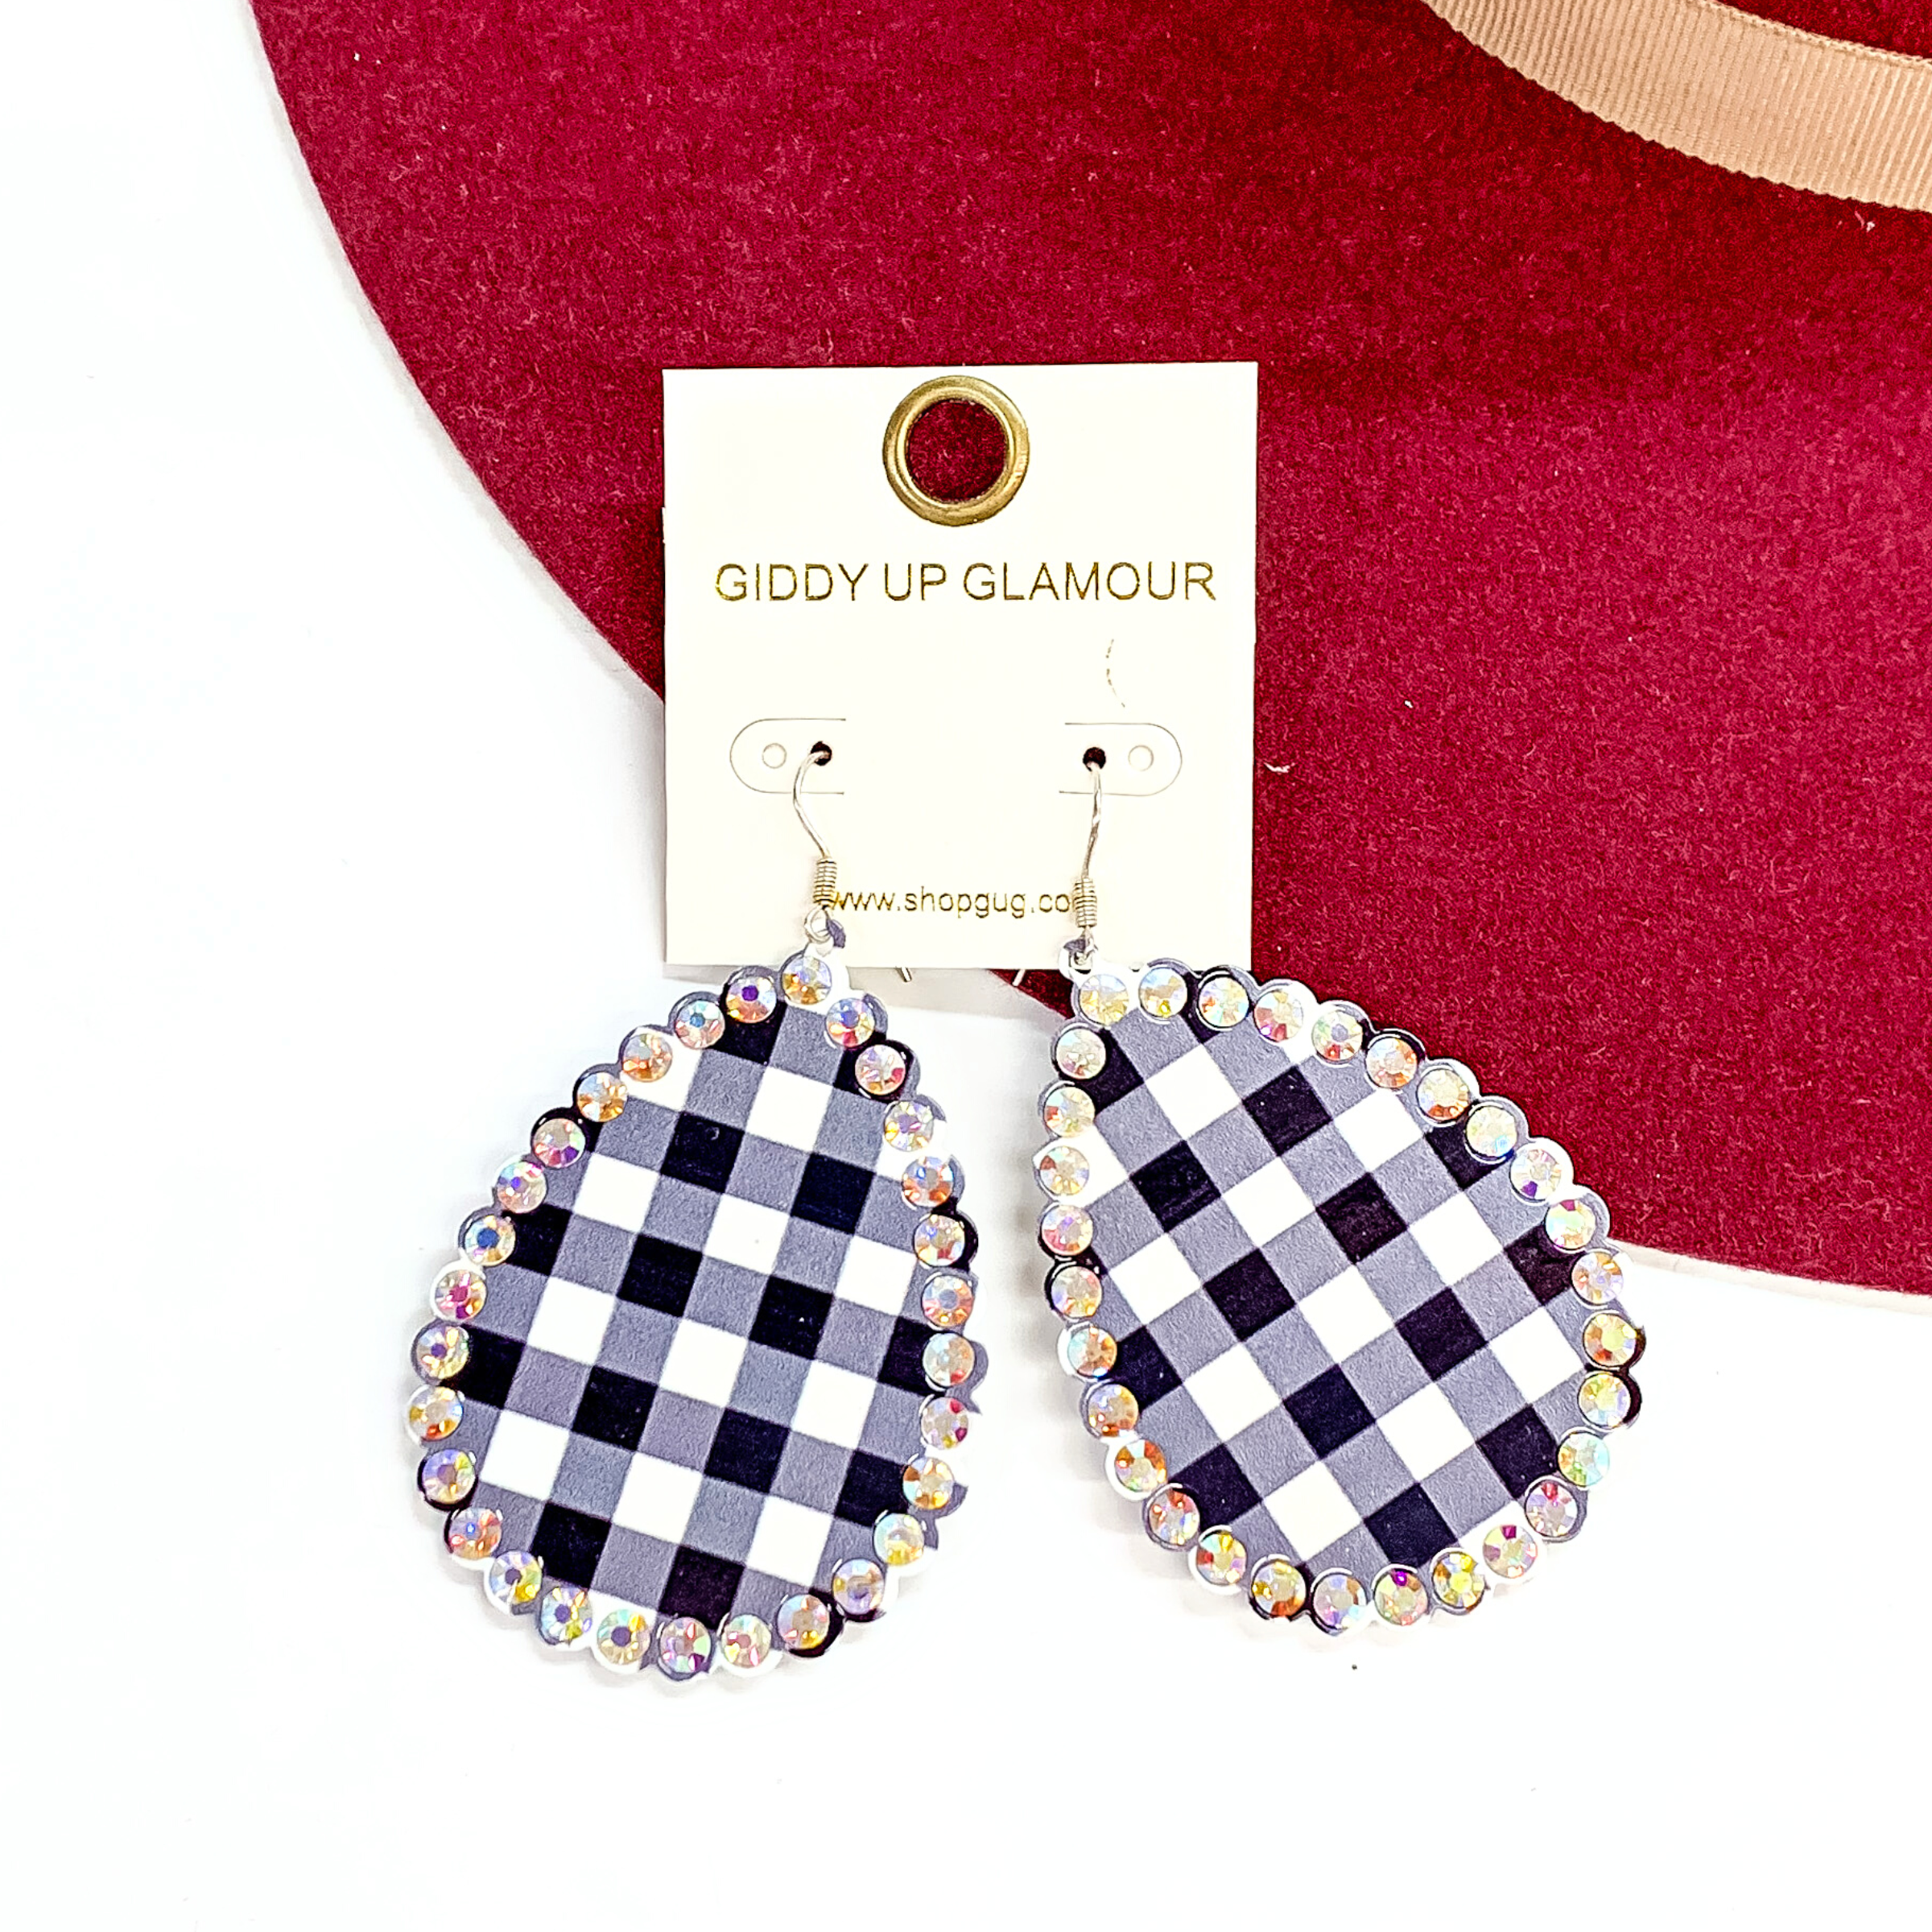 These are teardrop earrings in black and white buffalo plaid print with  scalloped eddges, there are ab crystals all around. These earrings are taken  on a red felt hat brim and on a white background.